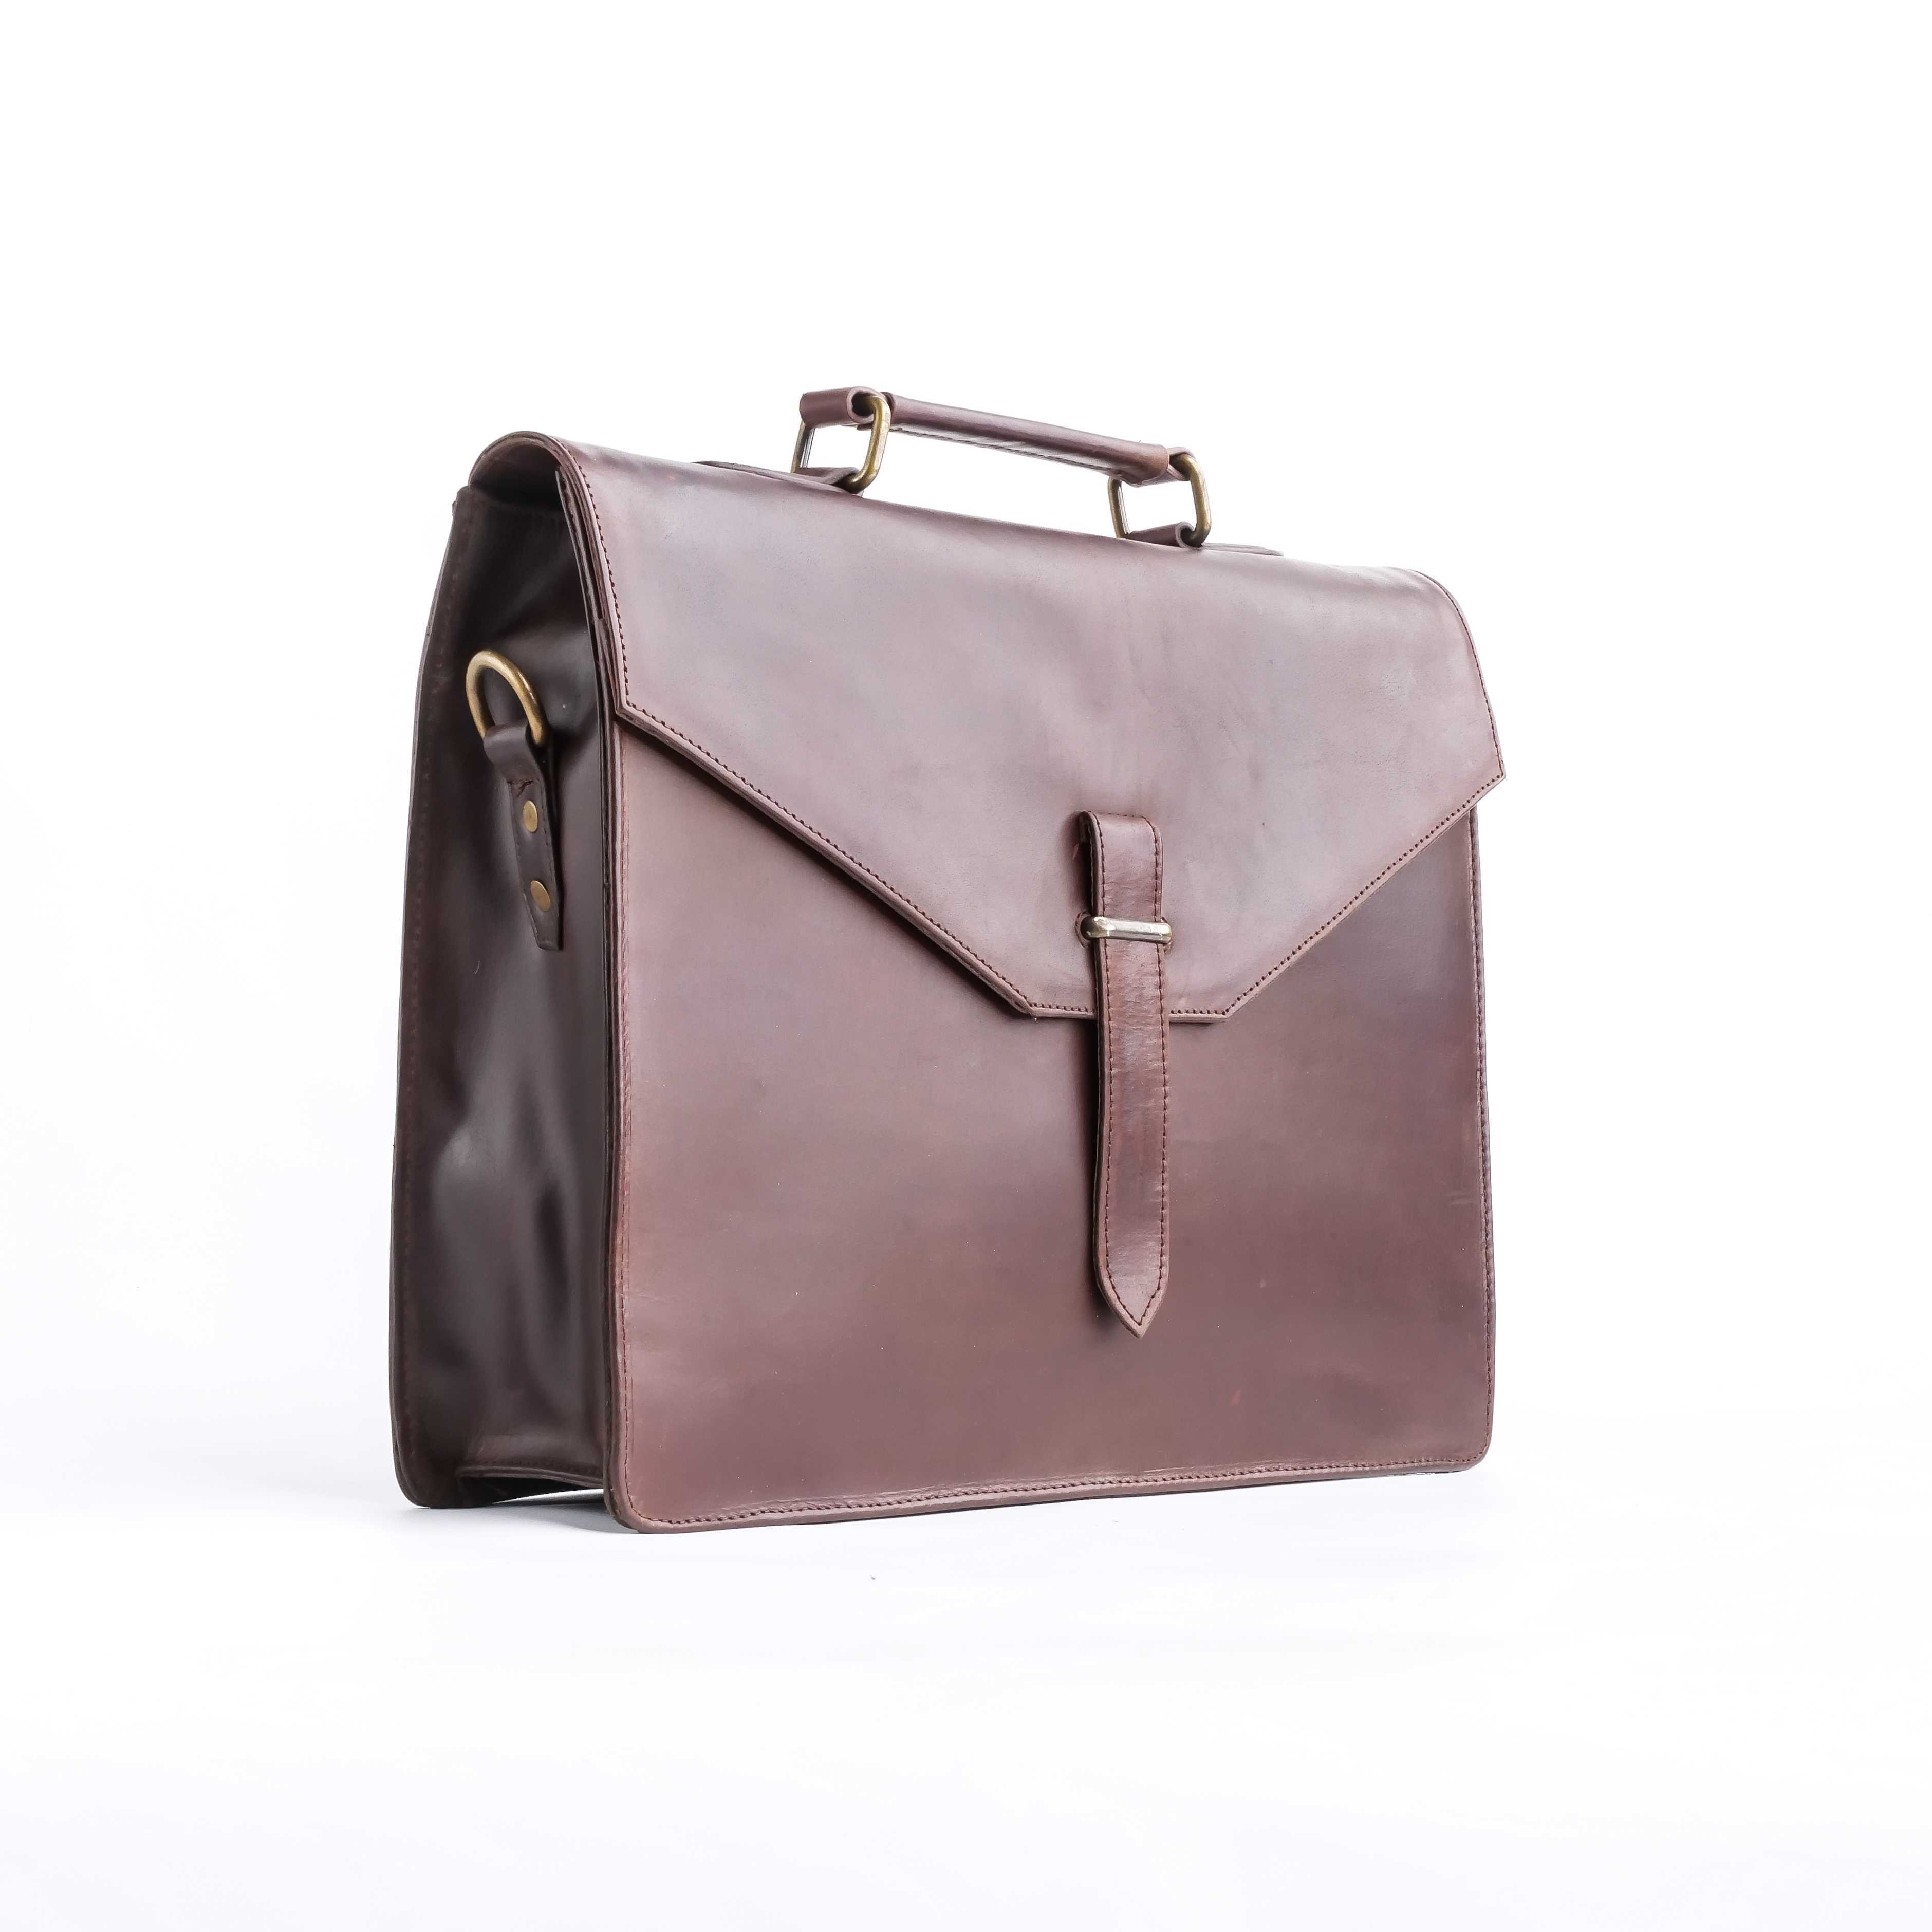 The Corporate Pure Dark Brown Leather Bag